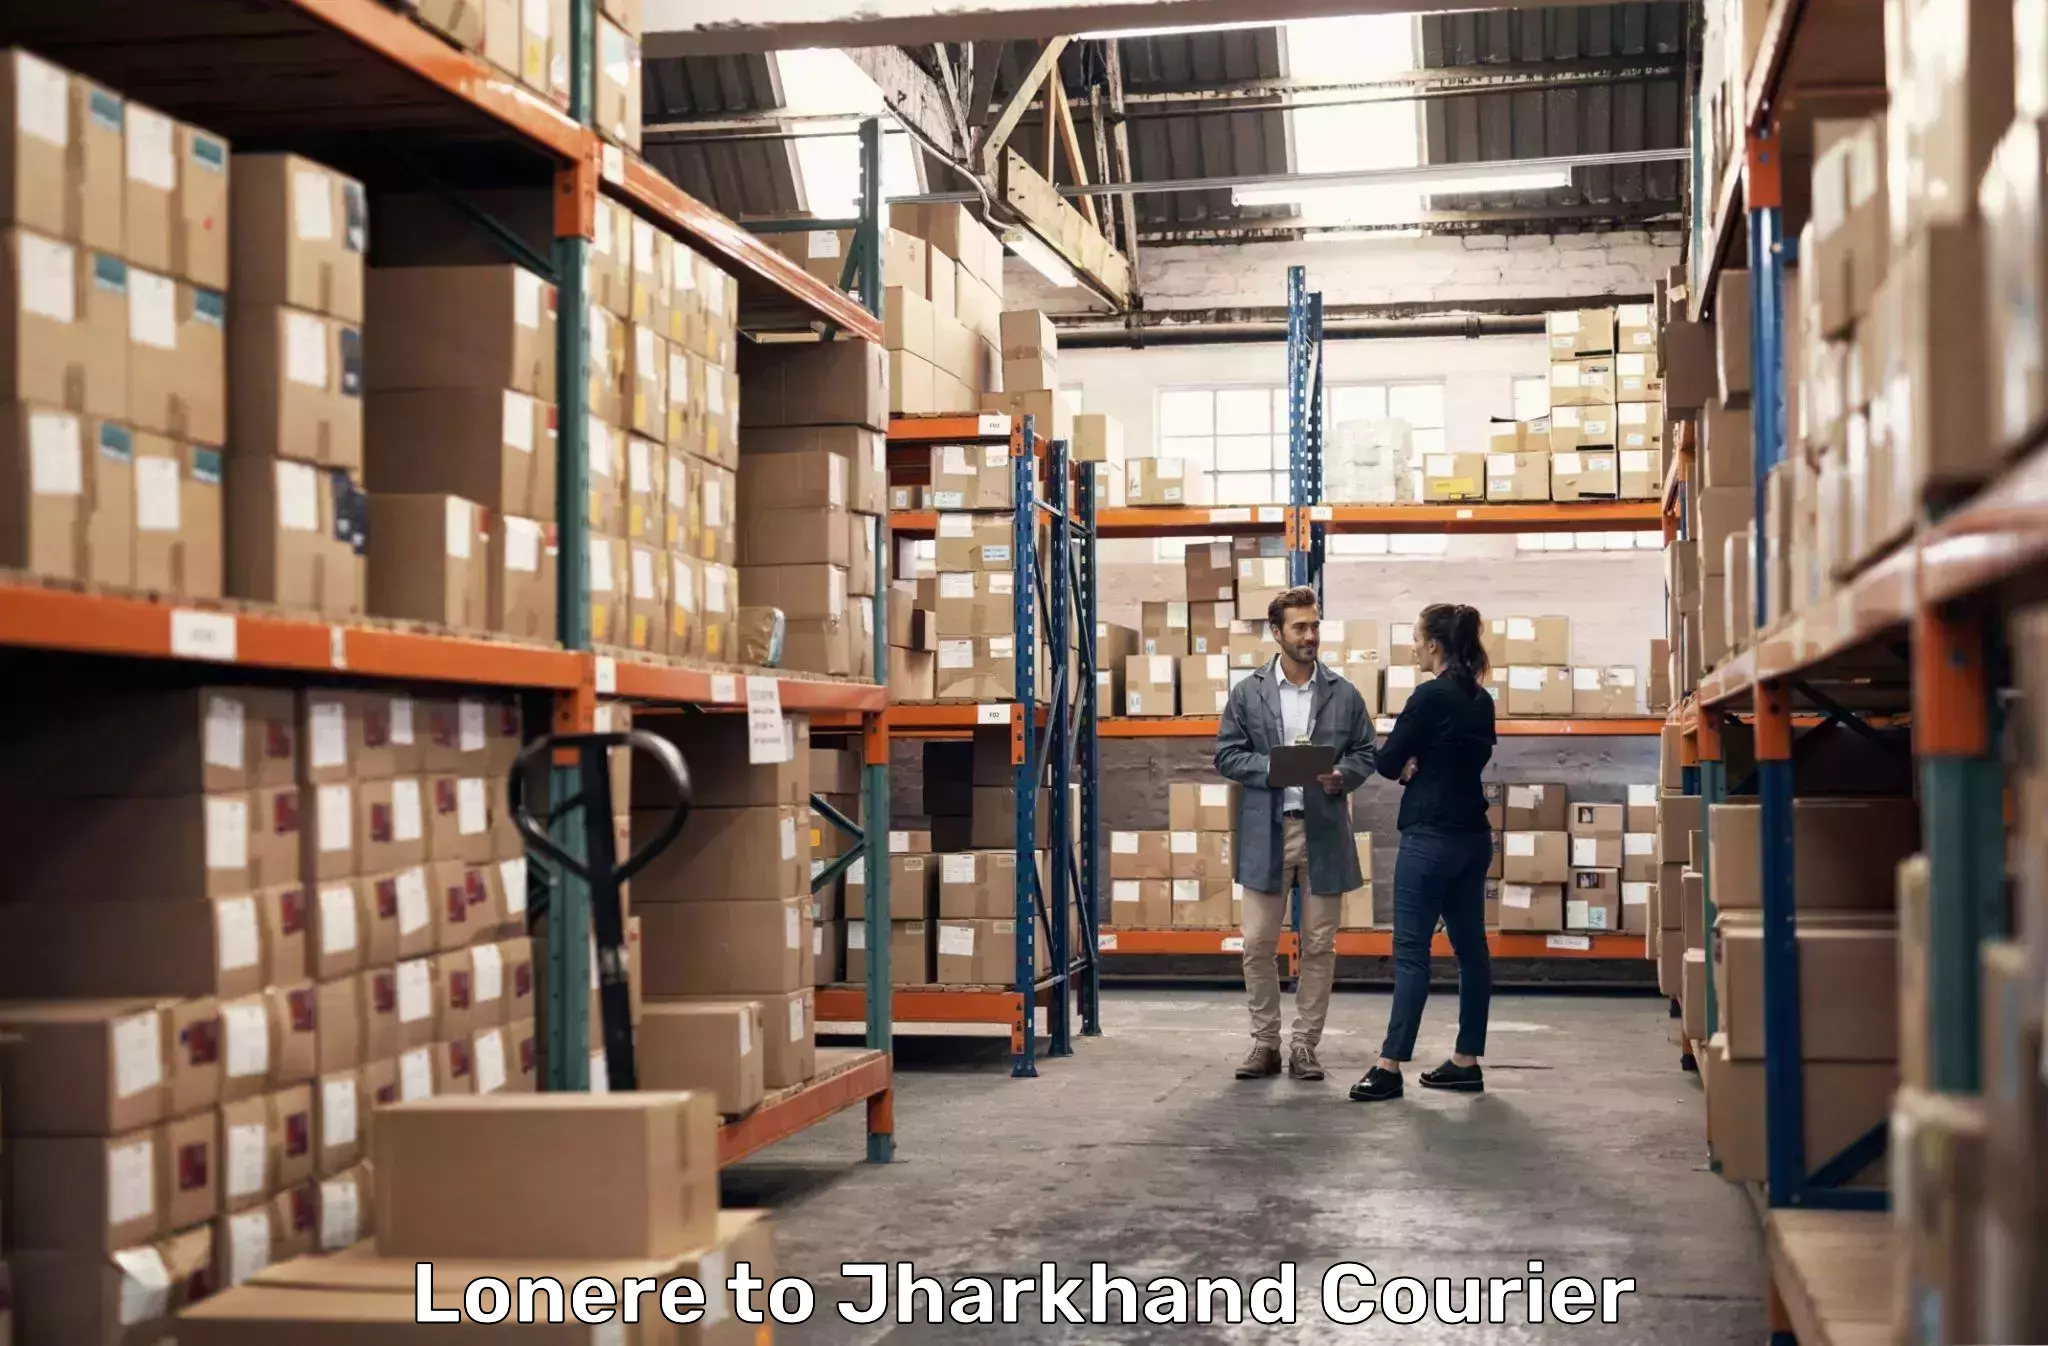 Business shipping needs Lonere to Peterbar